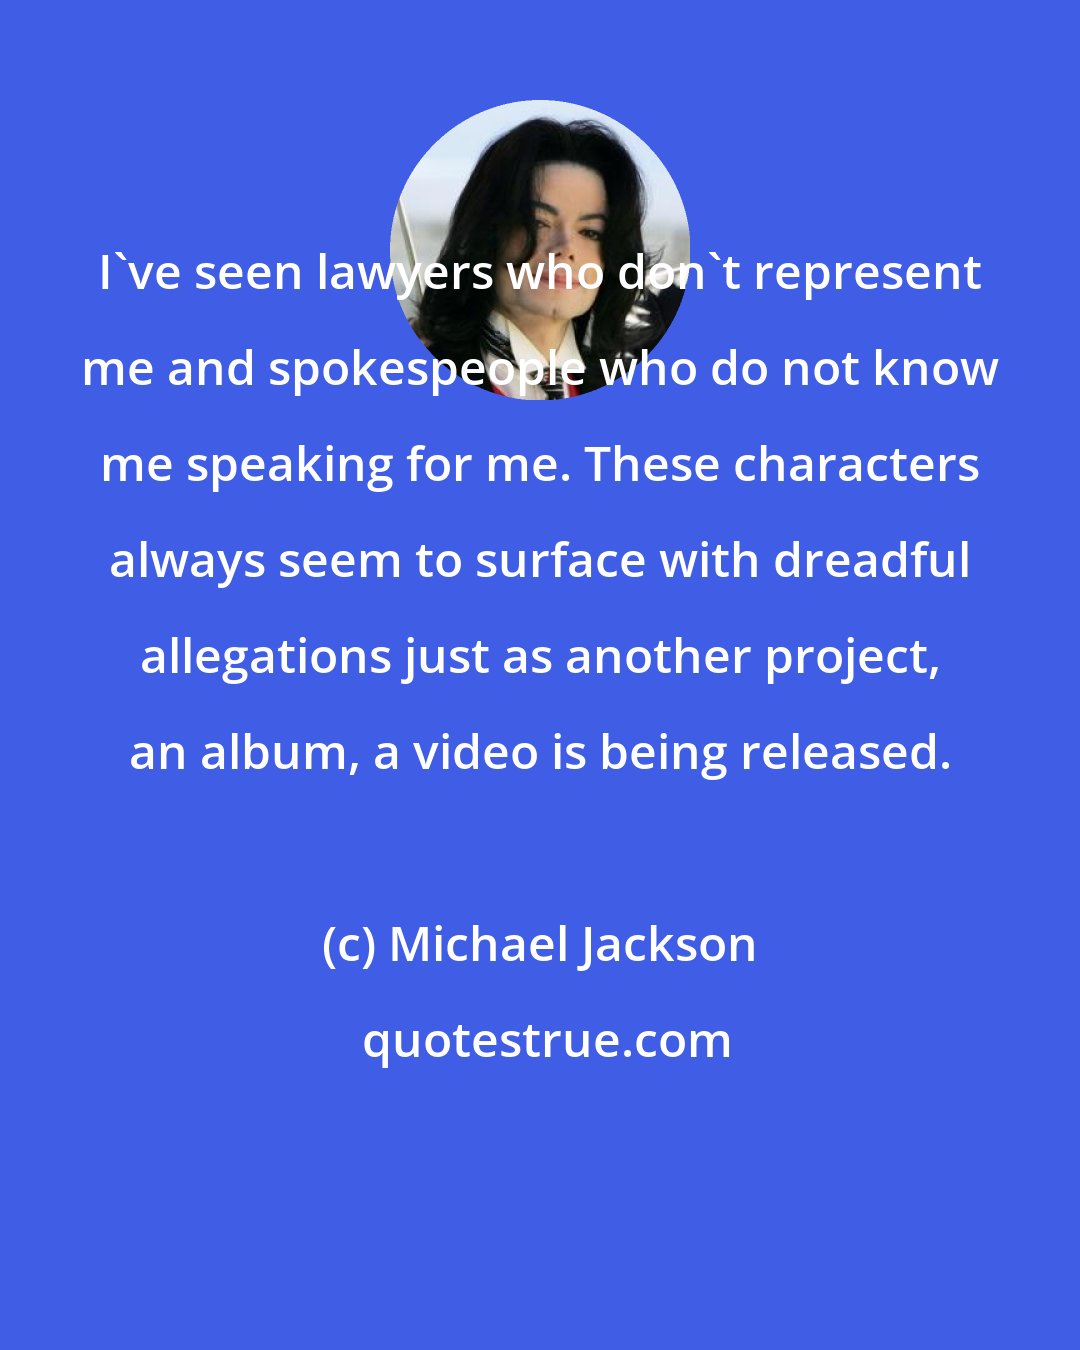 Michael Jackson: I've seen lawyers who don't represent me and spokespeople who do not know me speaking for me. These characters always seem to surface with dreadful allegations just as another project, an album, a video is being released.